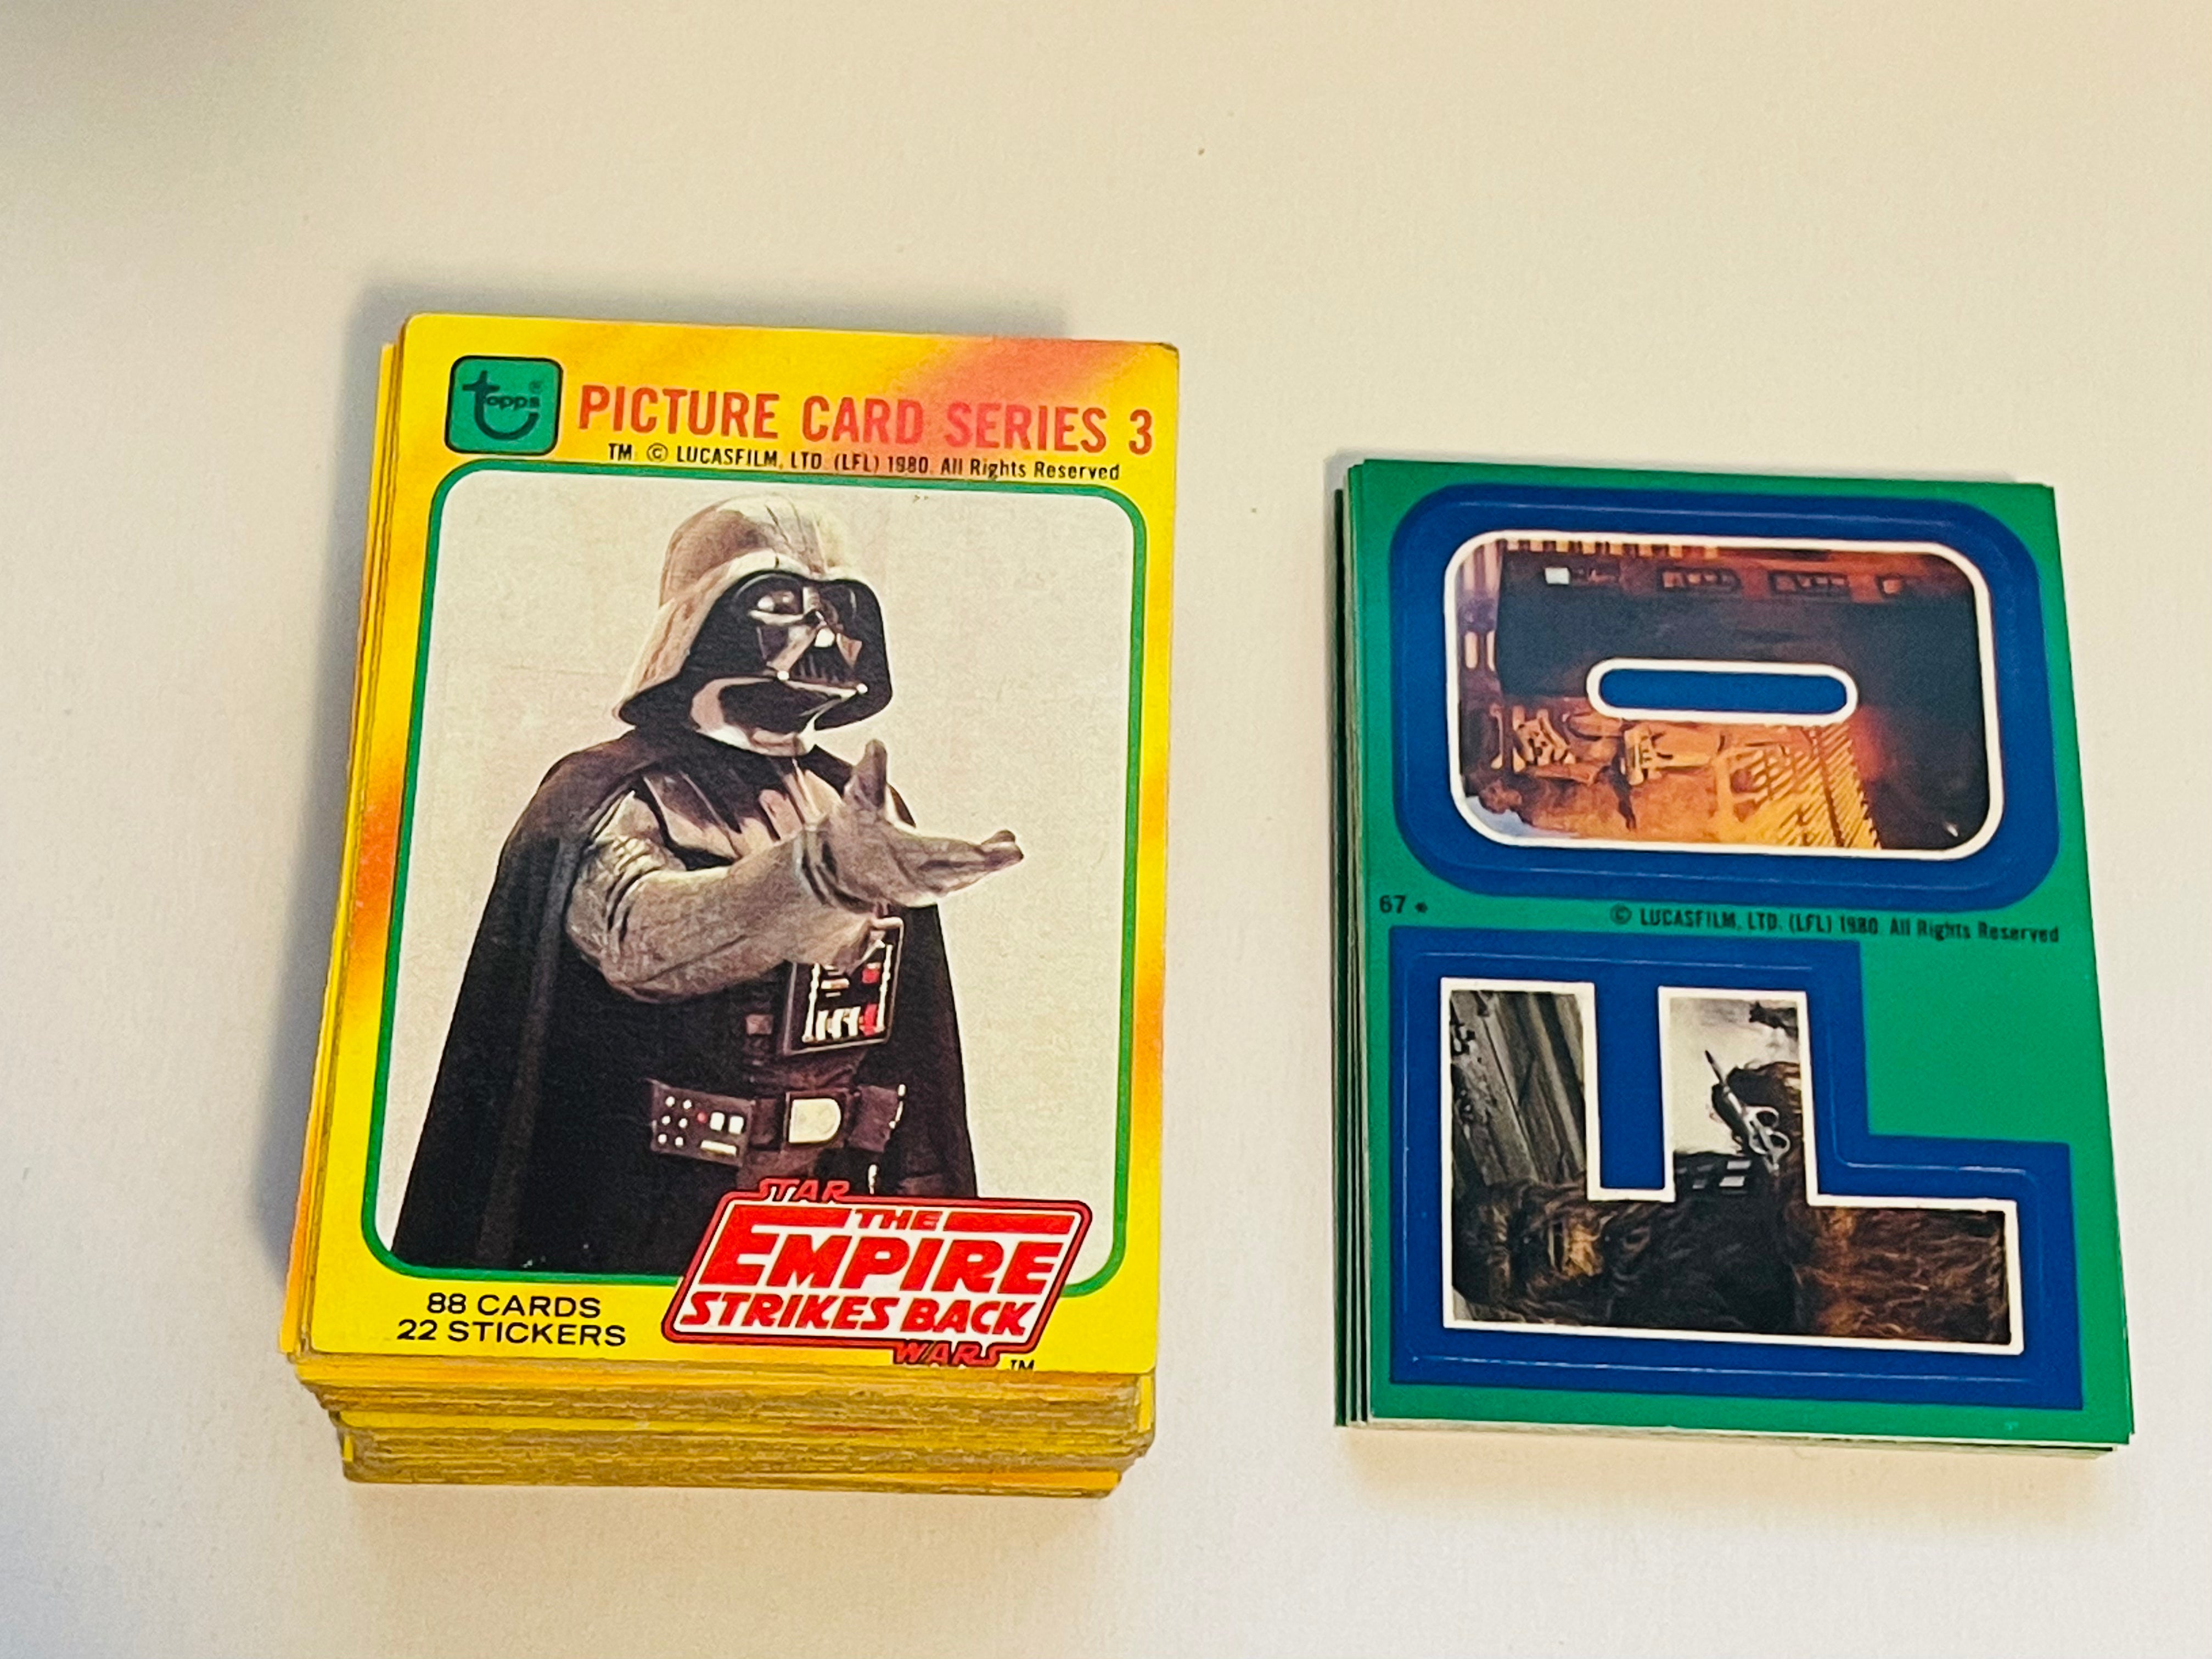 Star Wars Empire Strikes Back series 3 cards and stickers set 1981